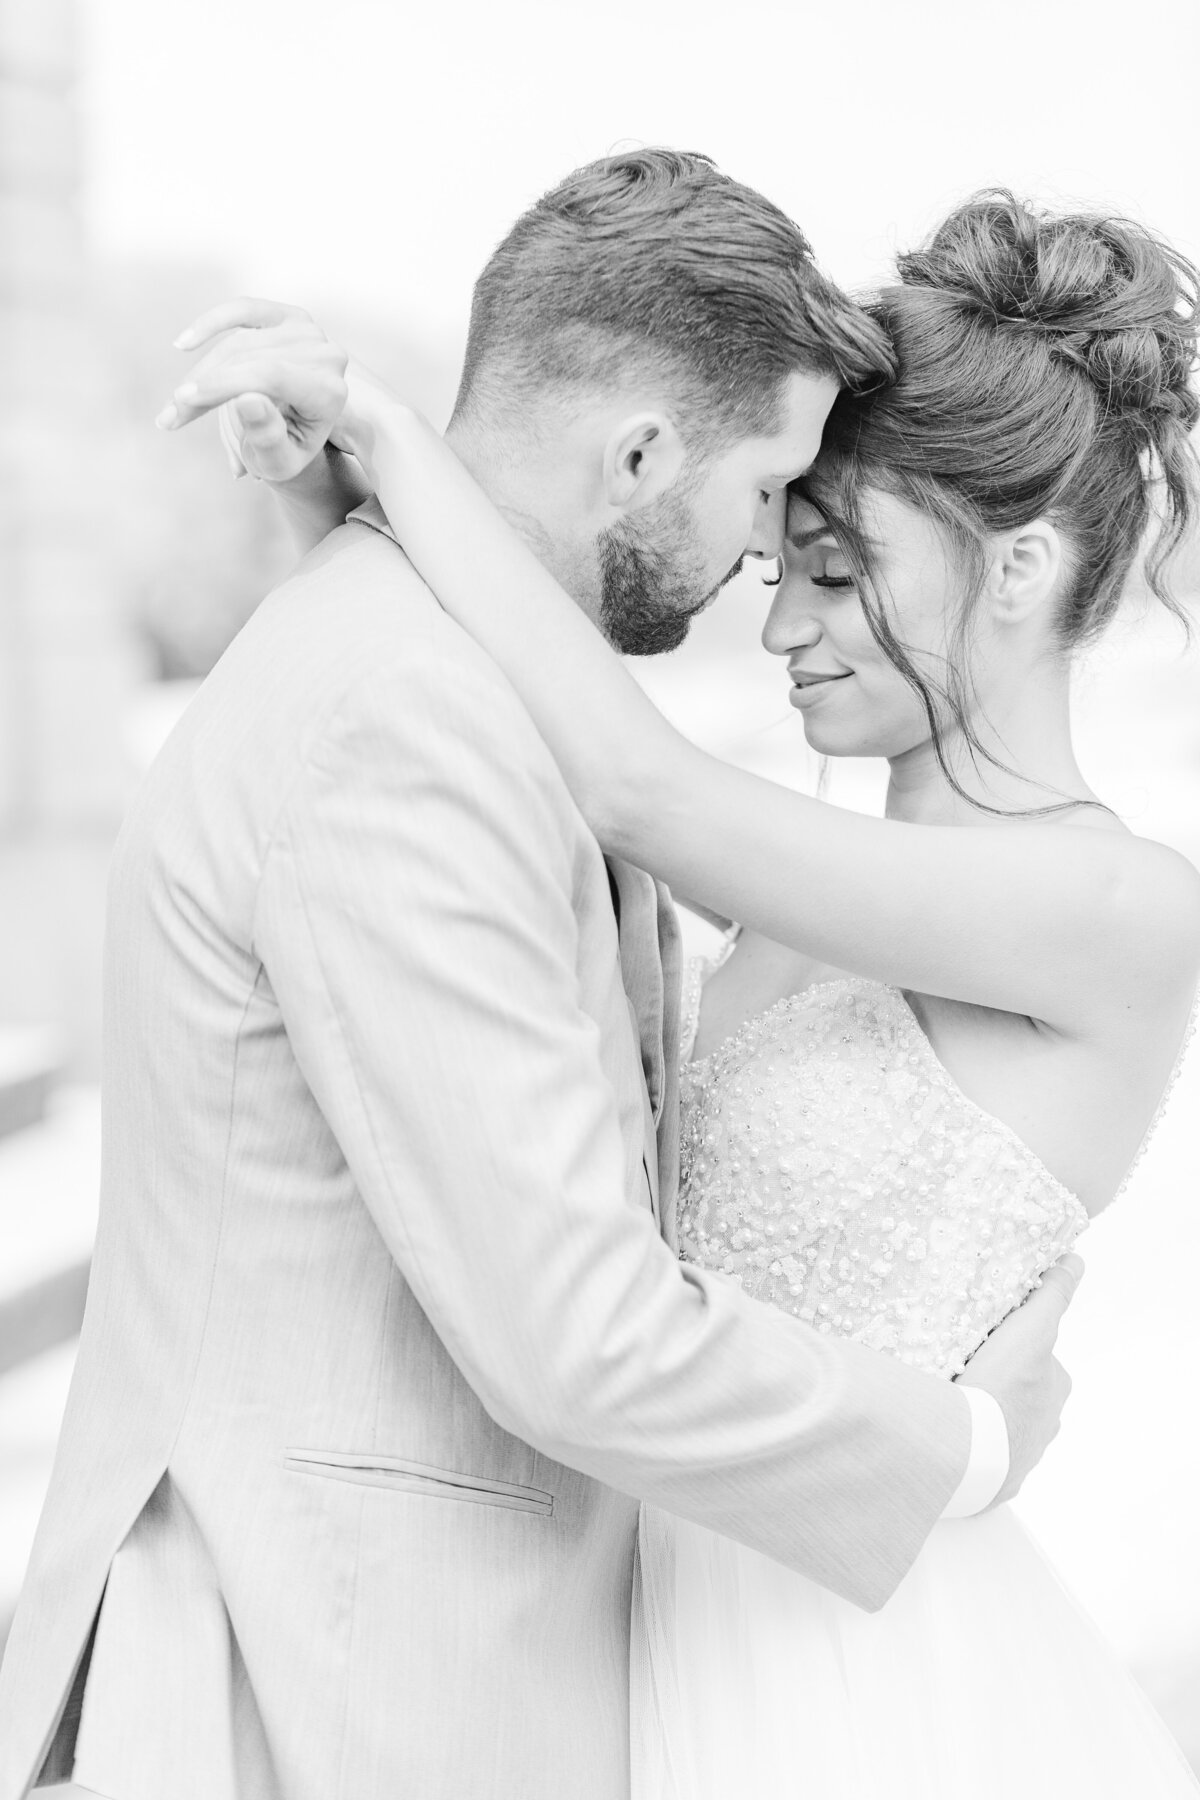 Black and white image. A bride and groom are touching heads with their eyes closed. The bride's arms are draped around the groom's neck. Intimate wedding photo captured by premier North Shore wedding photographer Lia Rose Weddings